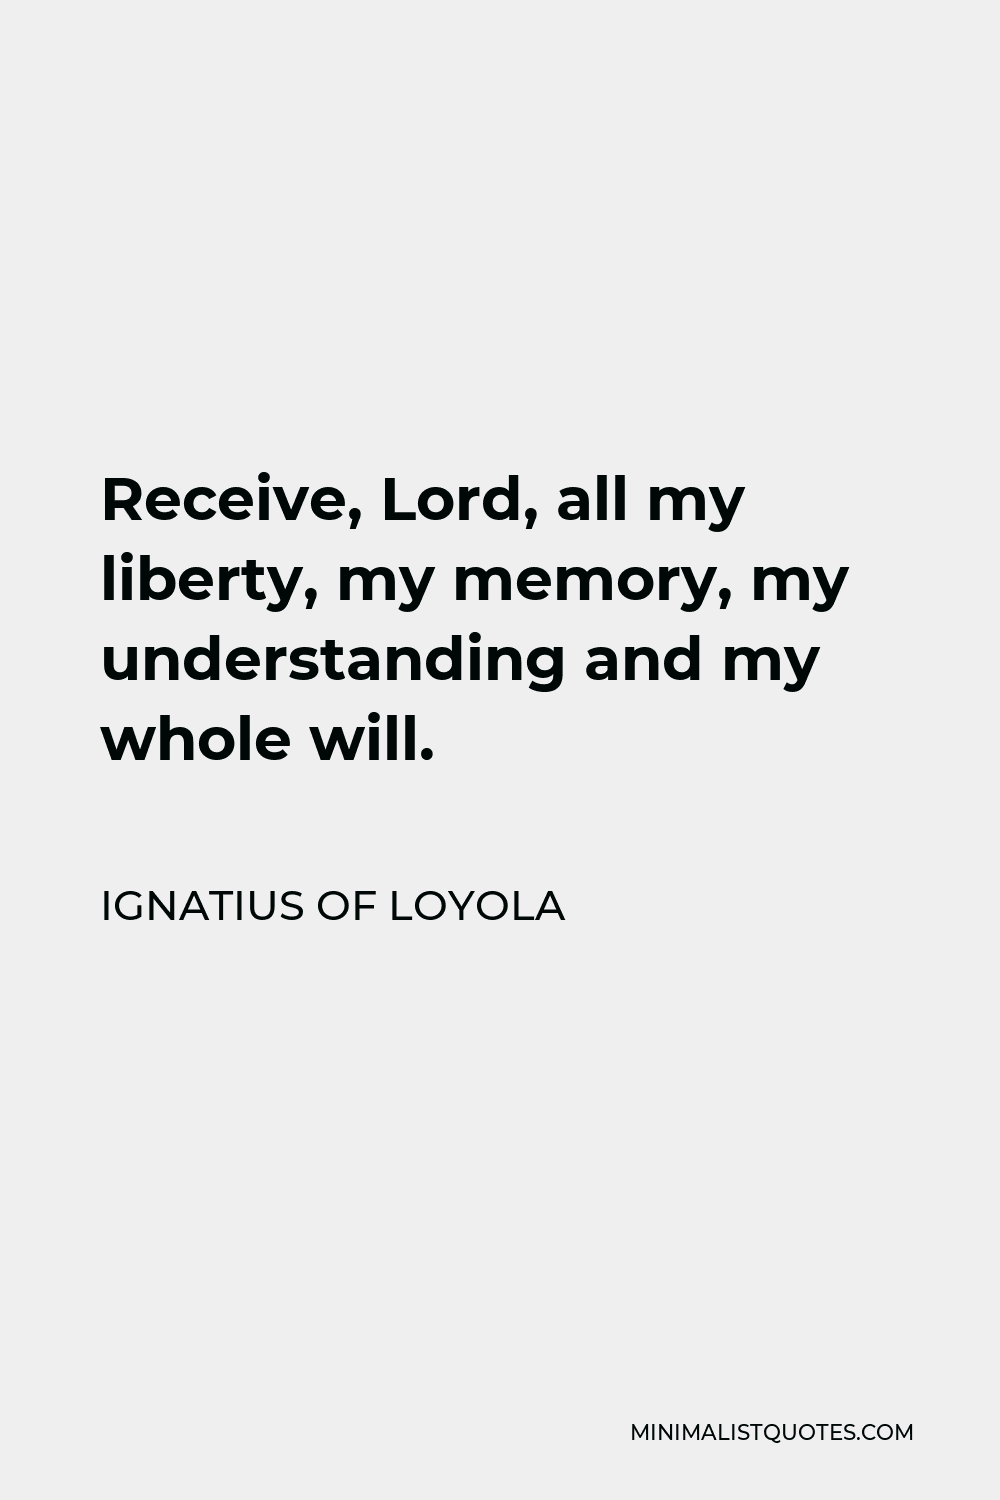 Ignatius of Loyola Quote - Receive, Lord, all my liberty, my memory, my understanding and my whole will.